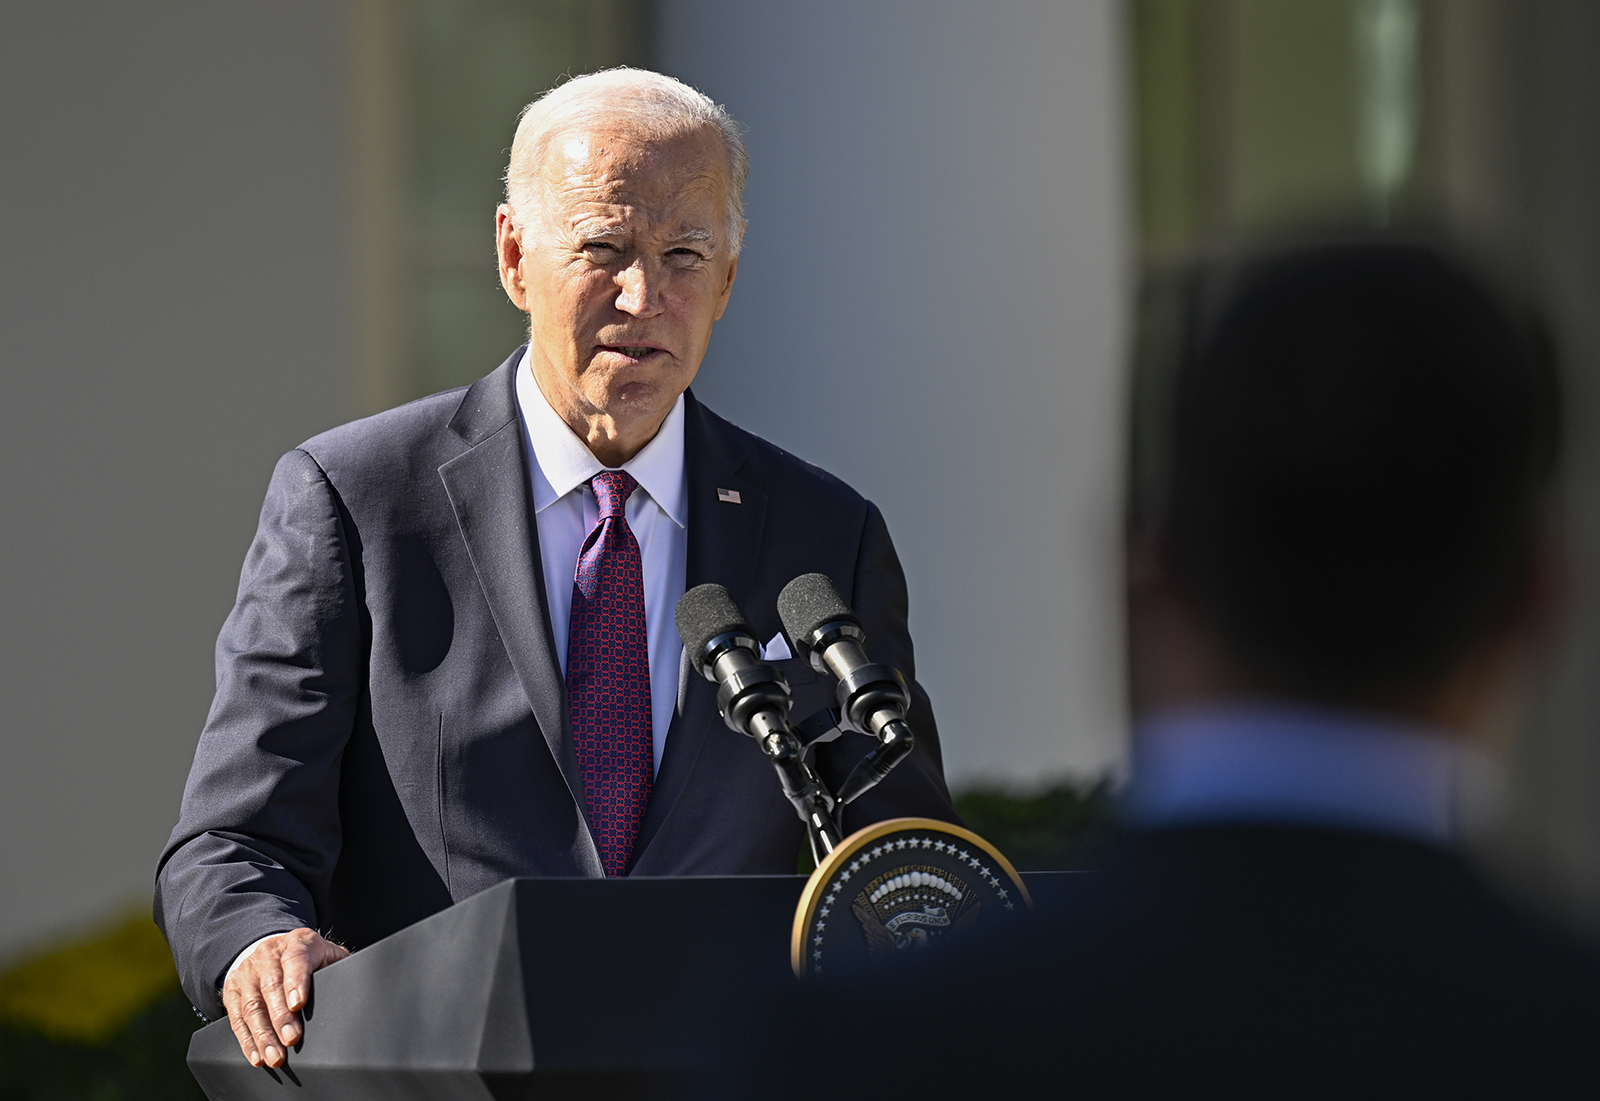 Joe Biden attends a conference at the White House in Washington D.C., on October 25.